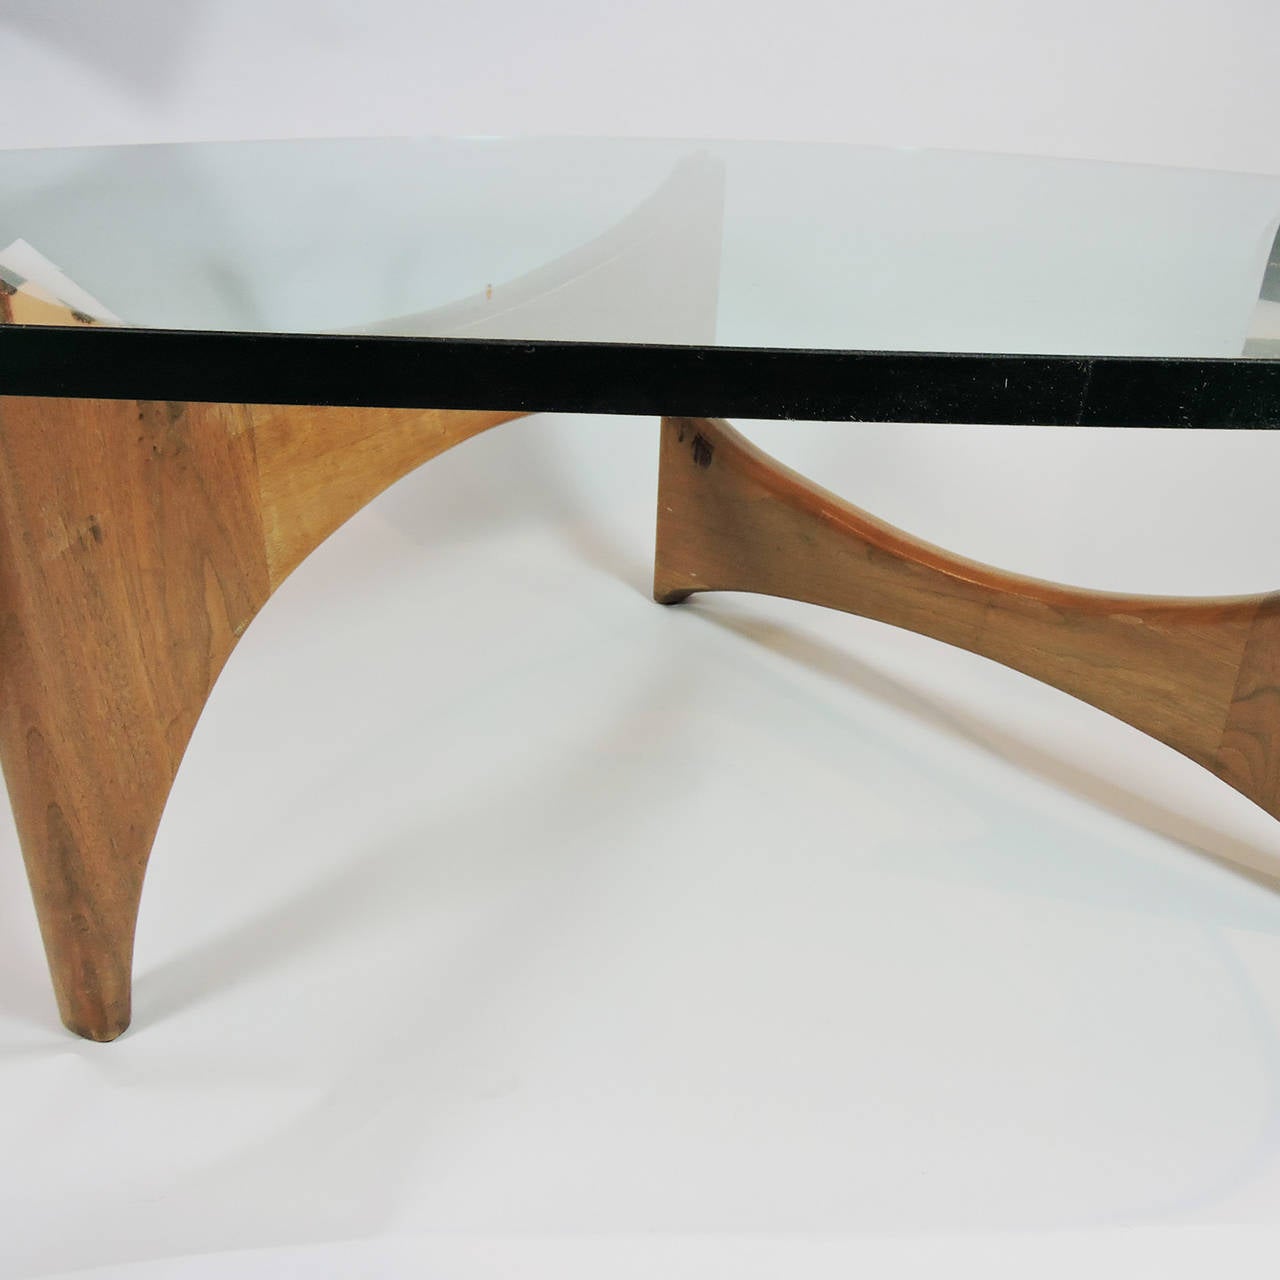 Mid-Century Modern glass and wood coffee table, manner of Isamu Noguchi. The adjustable curved wood base supporting a free-form glass top. 
Dimensions: 15 1/2 x 44 x 33 inches.